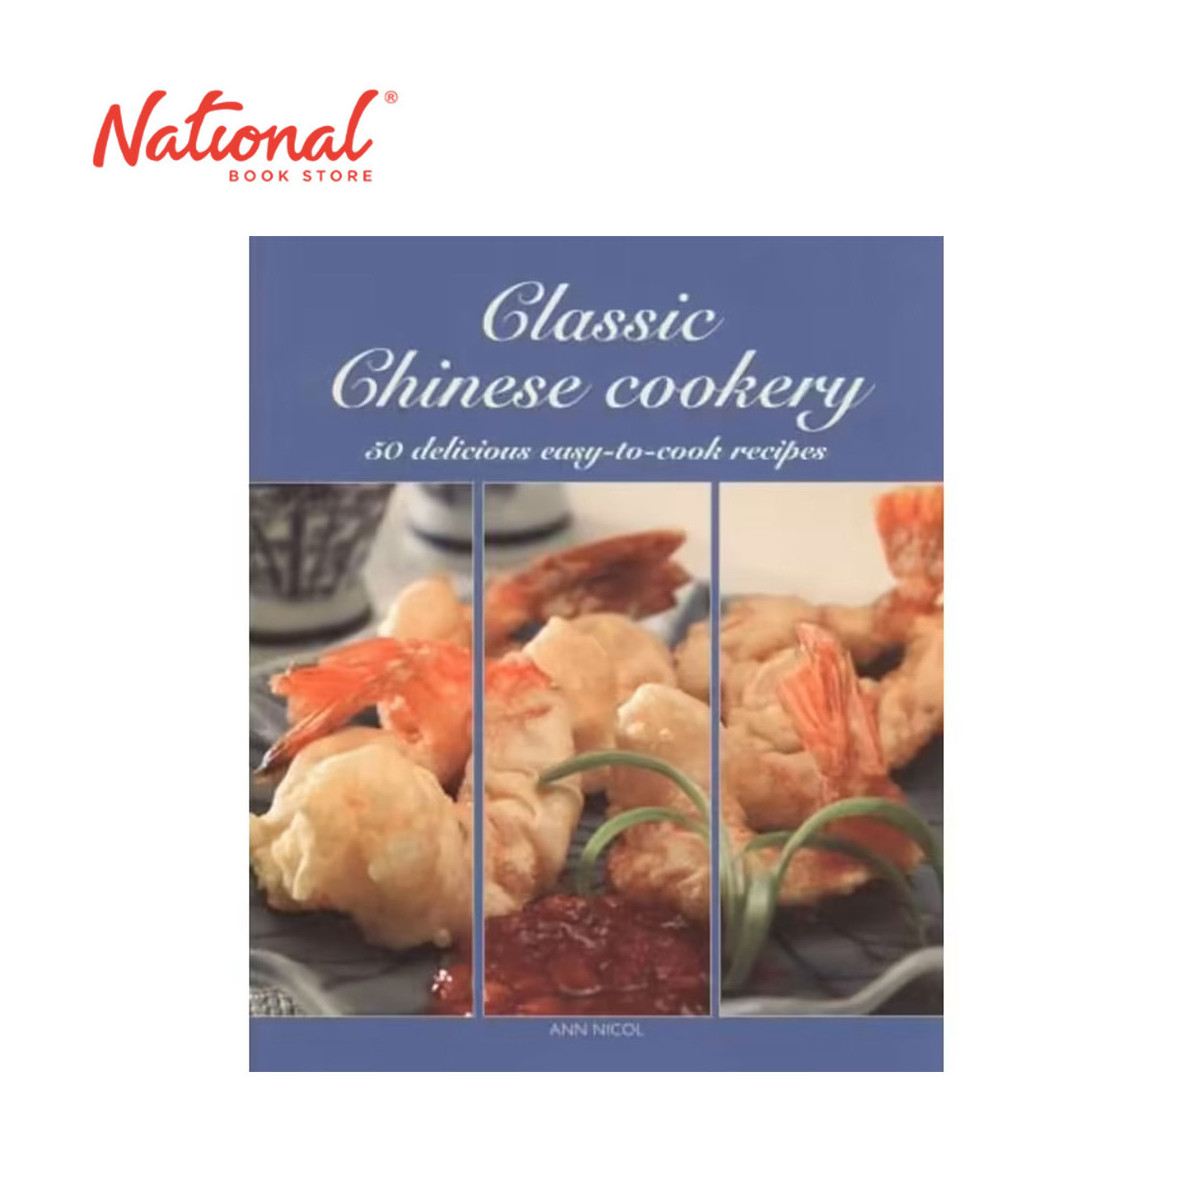 Classic Chinese Cookery (50 Delicious Easy-to-Cook Recipes) by Ann Nicol - Cookbook